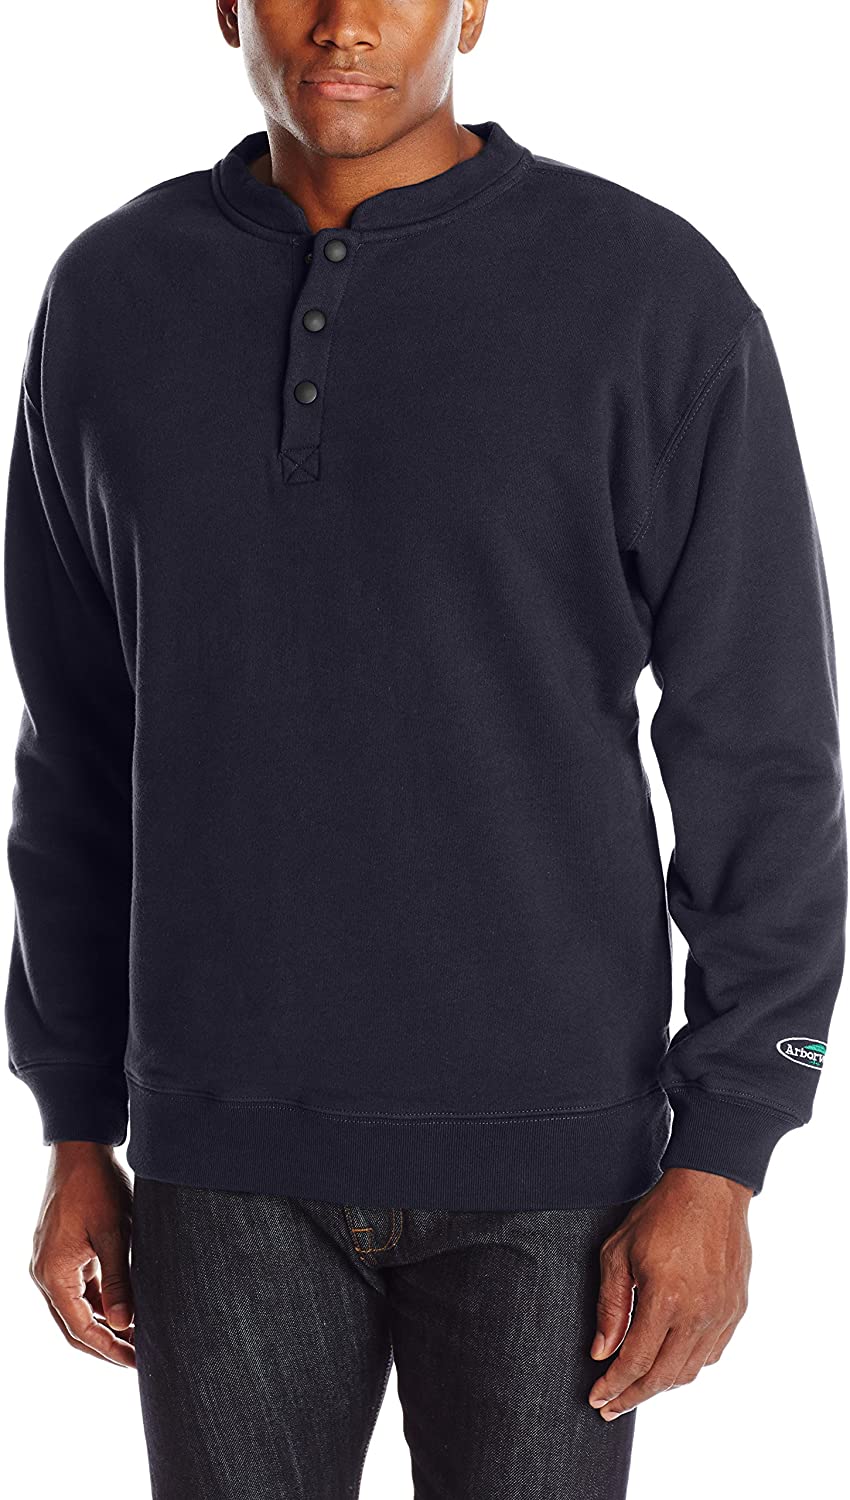 Arborwear Men's Double Thick Crew Sweatshirt in Navy from the from